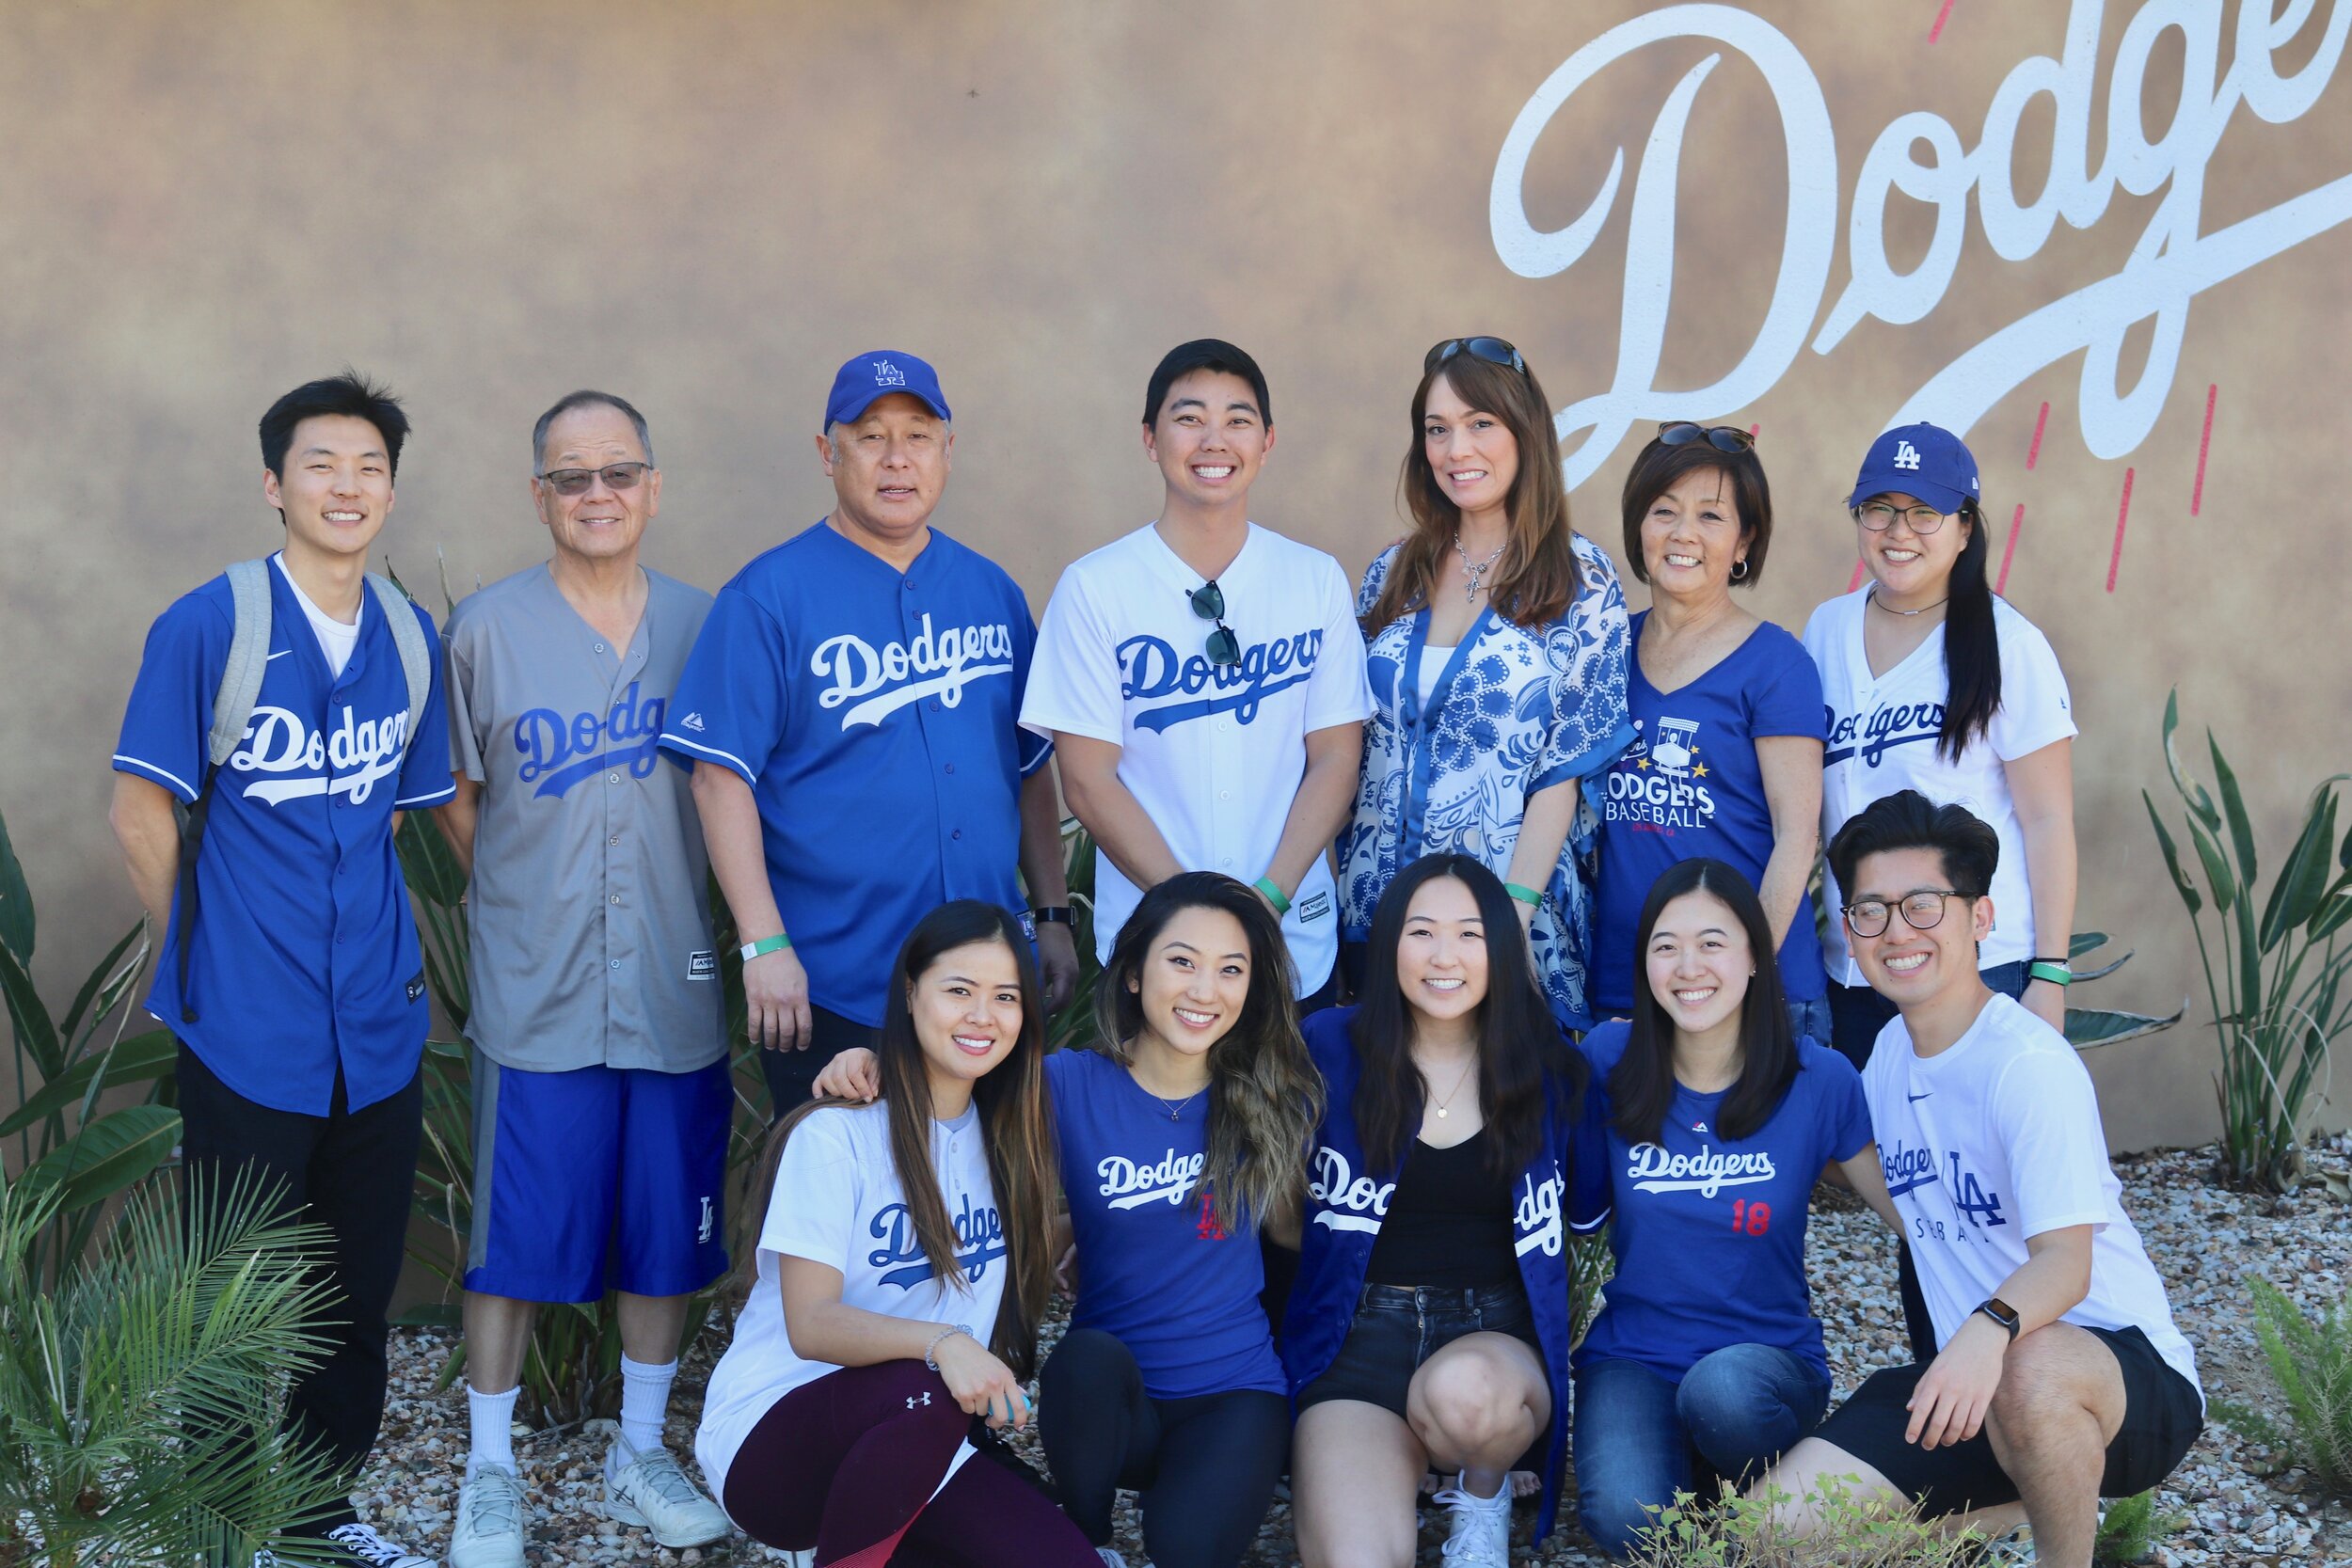 A large group of men and women smile wearing Dodger’s shirts in front of the Dodger’s painted sign on a building. 